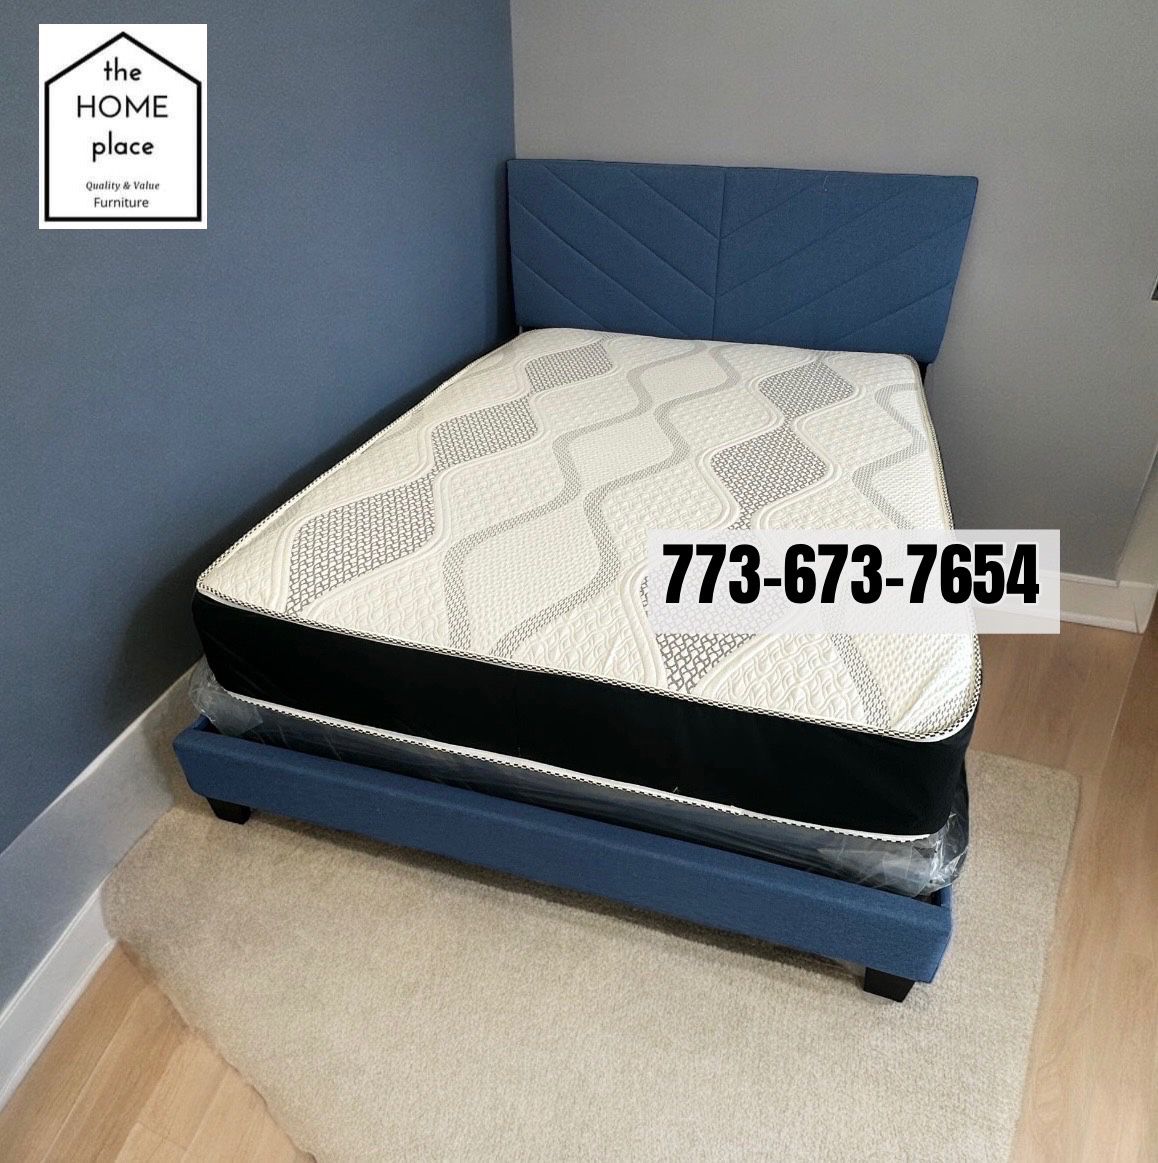 🚨 HUGE SALE 🚨 Brand New Full Bed Frame With Mattress And Box Spring In Stock NOW !!! 